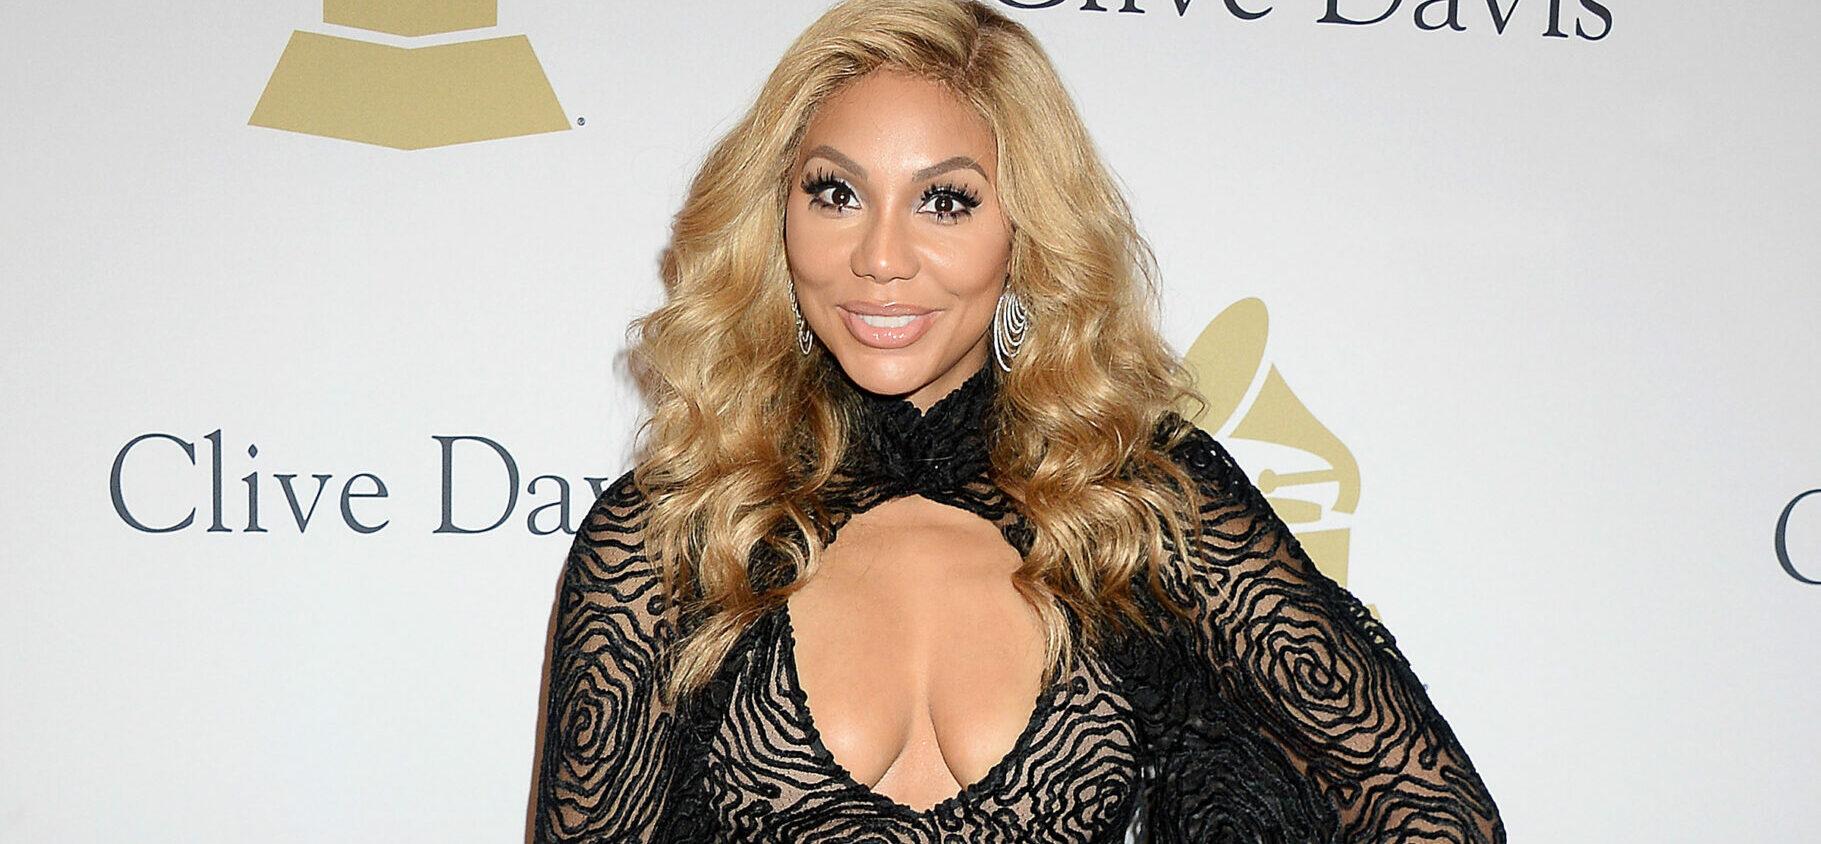 Tamar Braxton Says She KNOWS The Burglar Who Broke Into Her Home